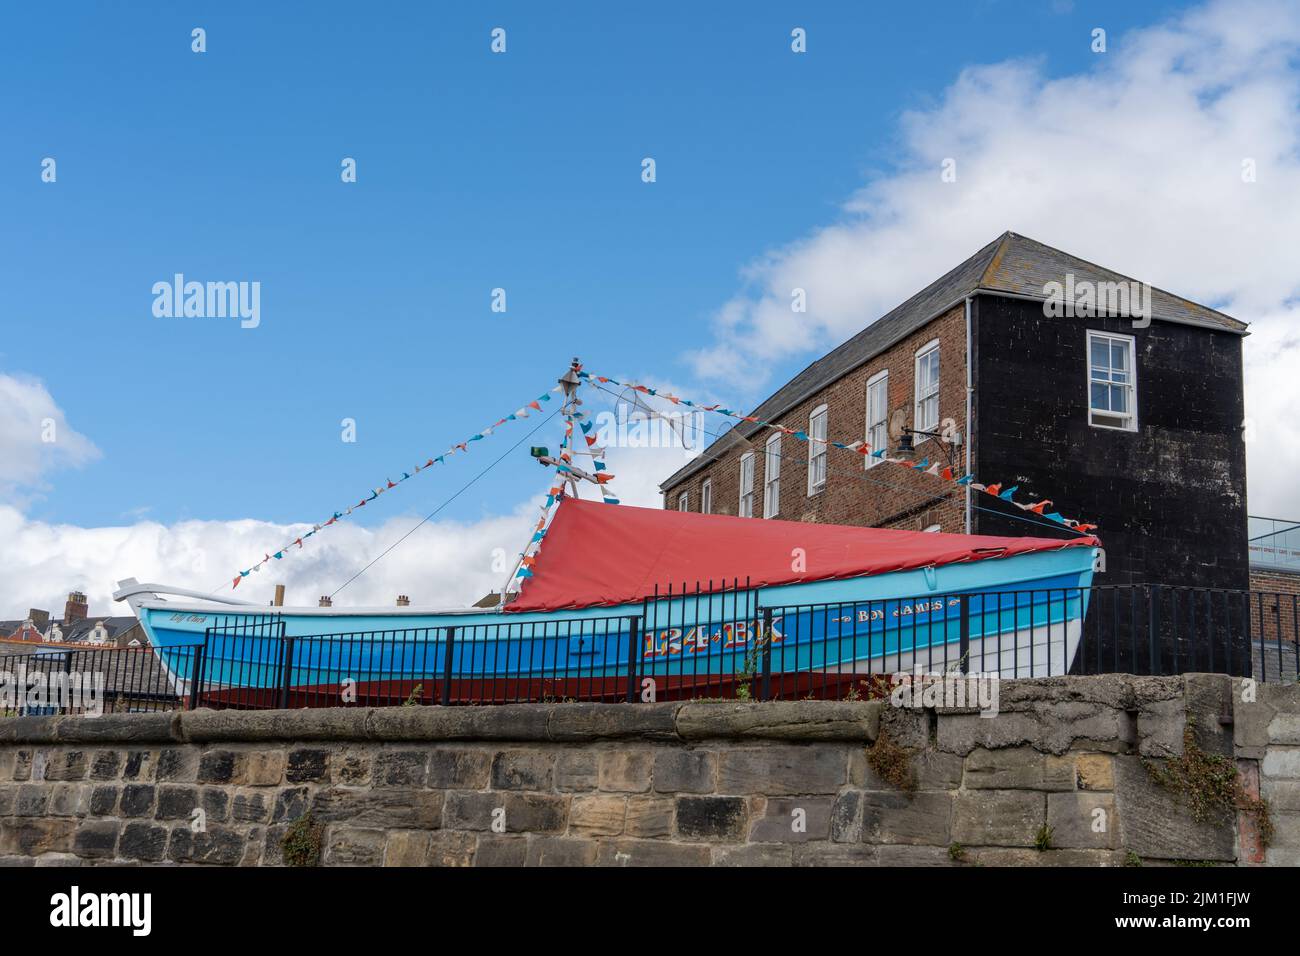 Brightly coloured restored fishing boat at Old Low Light on the Fish Quay in North Shields, North Tyneside, UK, near the River Tyne. Stock Photo